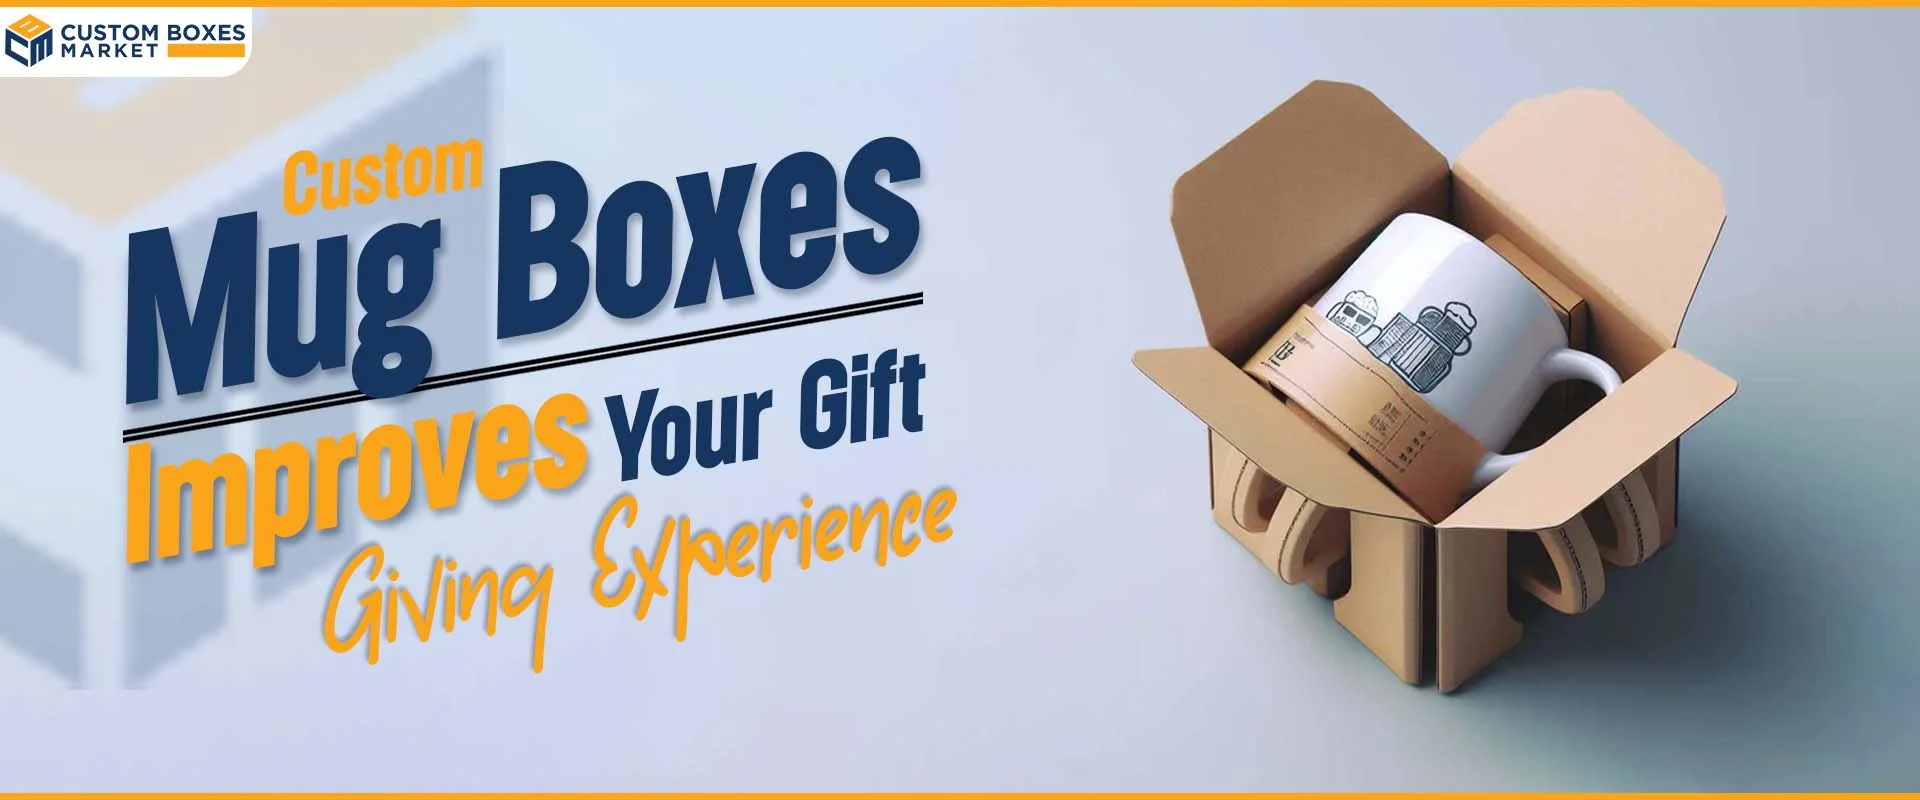 Custom Mug Boxes Improves Your Gift-Giving Experience